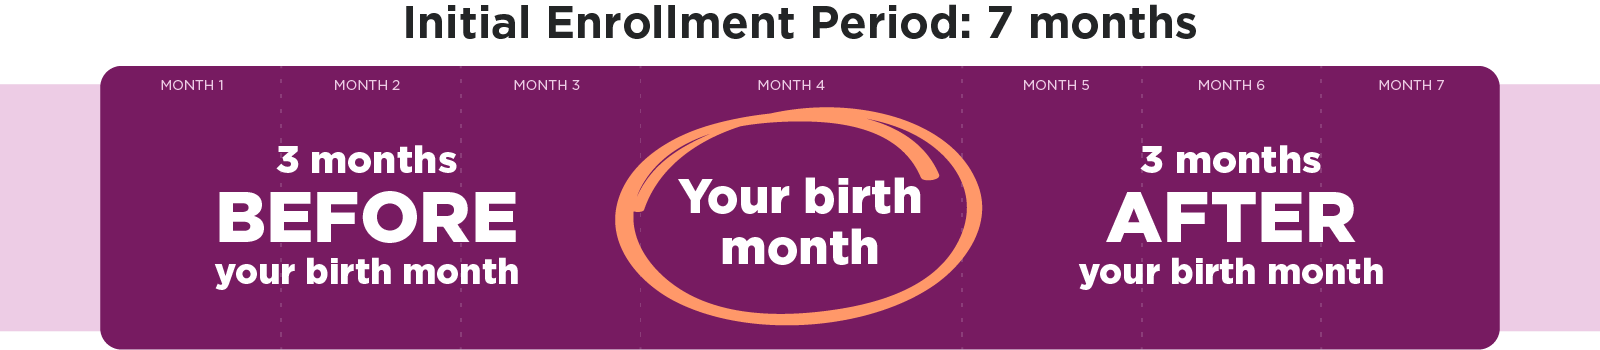 Your IEP begins three months before your 65th birthday and ends three months after your 65th birthday.